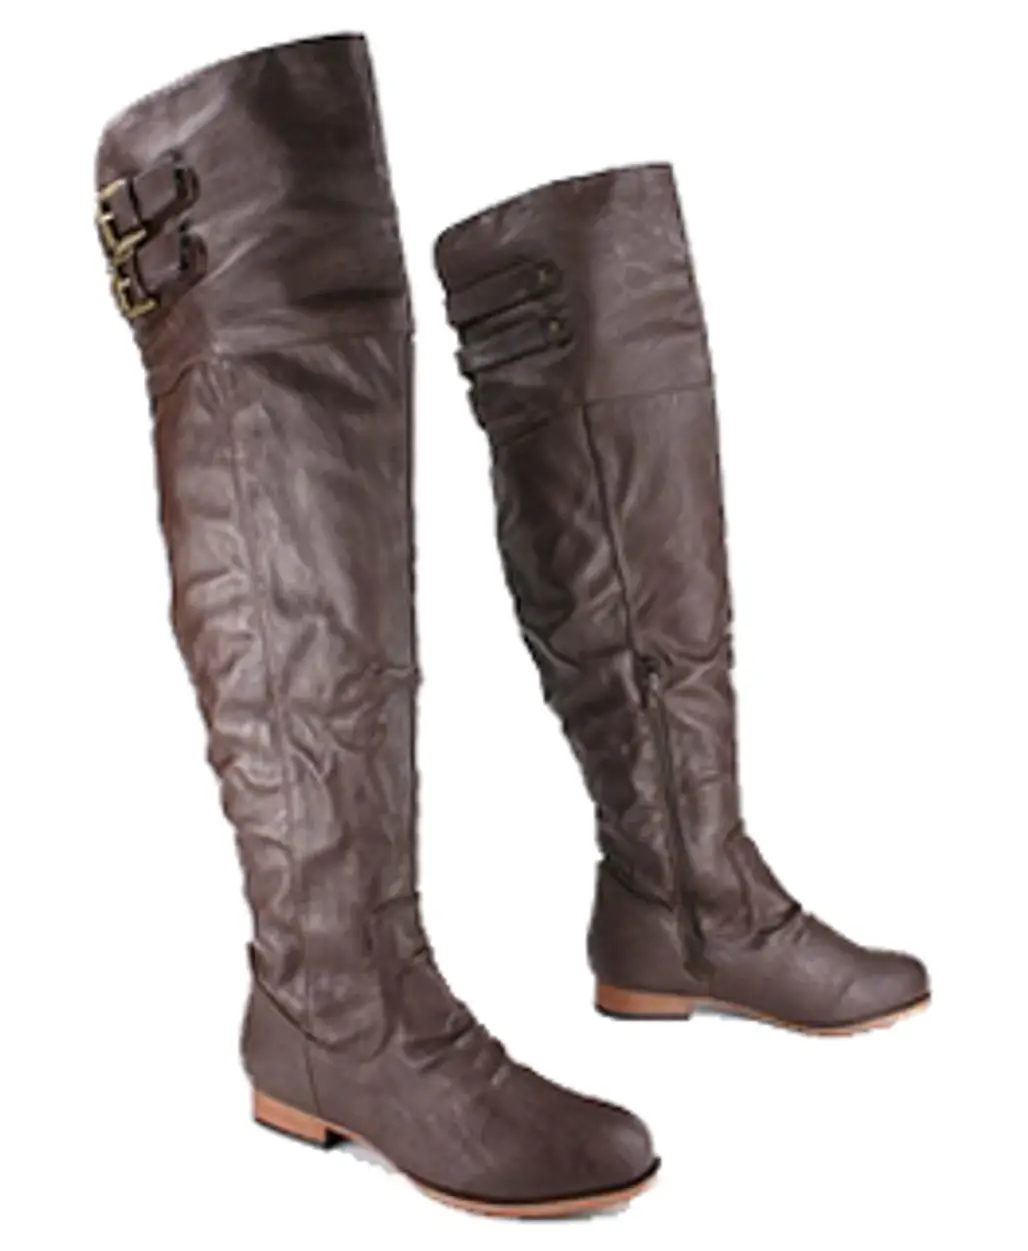 Leatherette over the Knee Boots